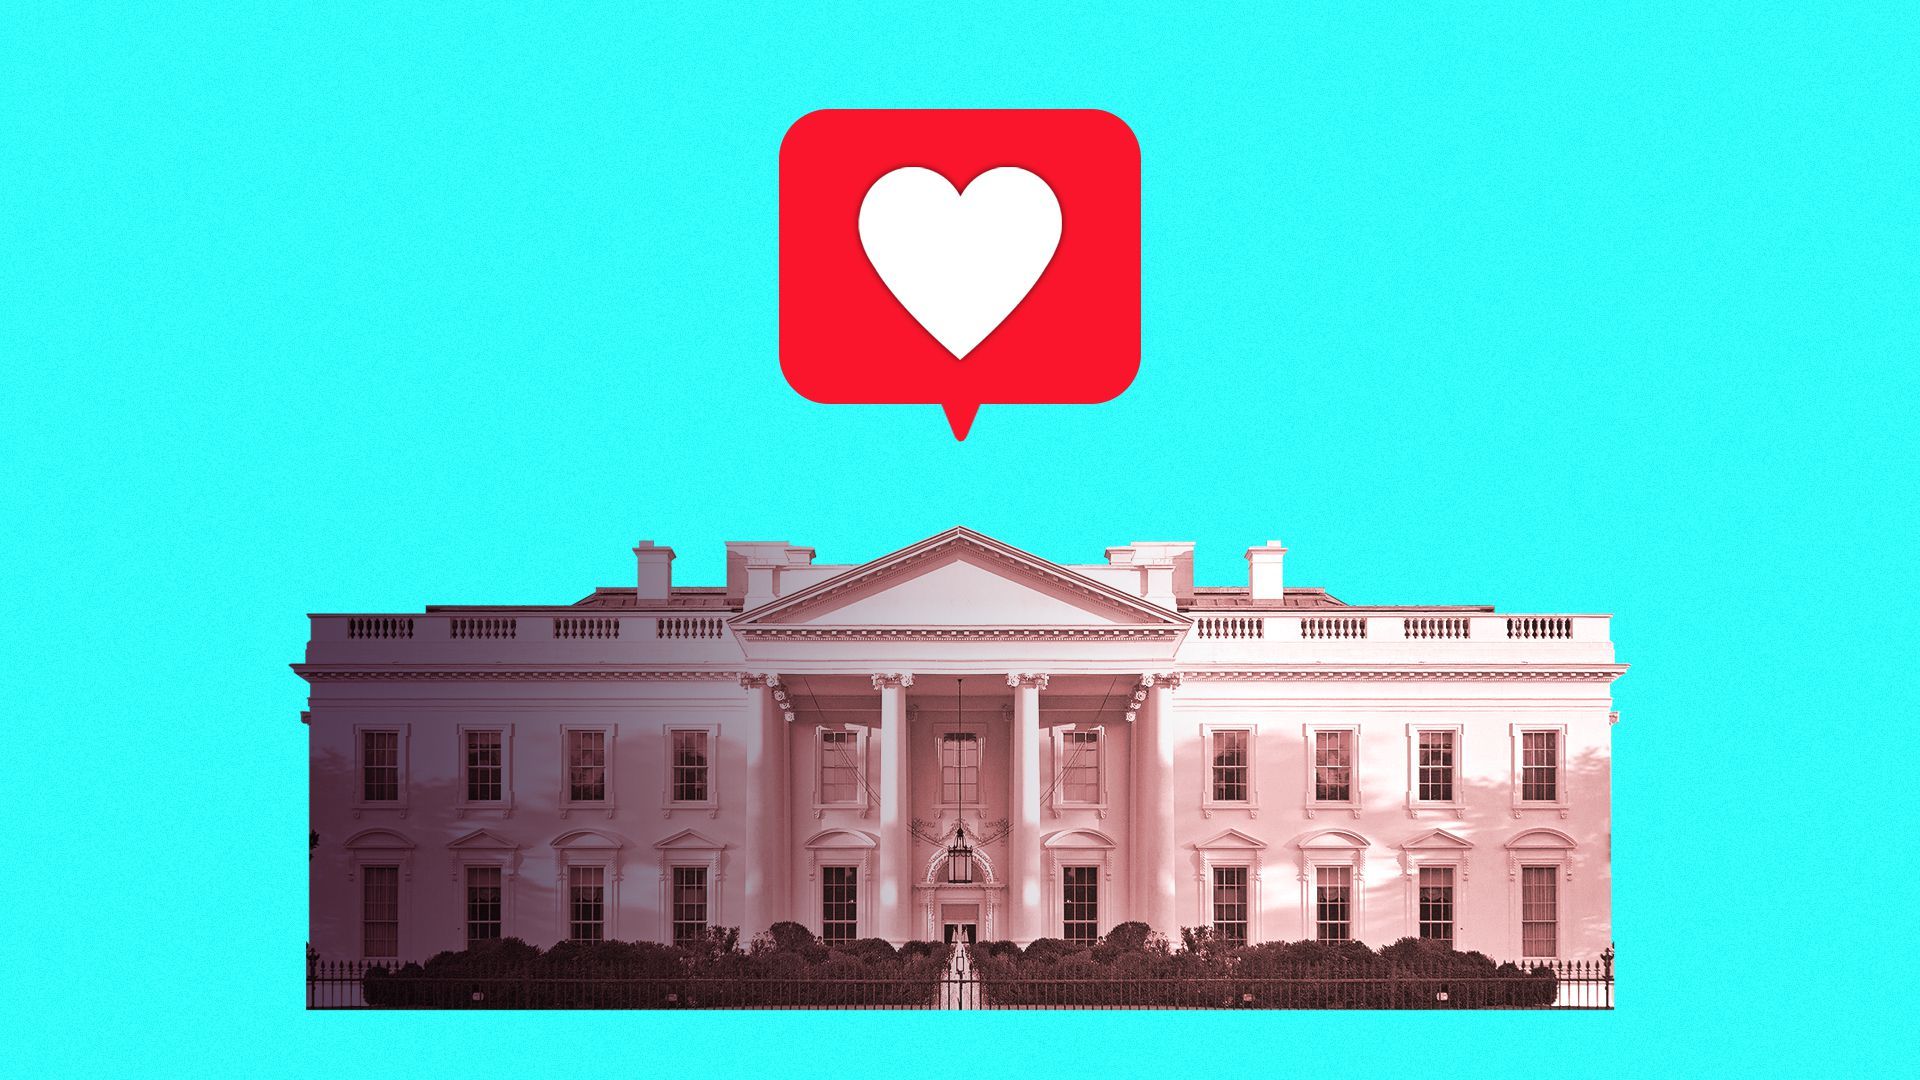 Illustration of the White House positioned under a floating social media heart